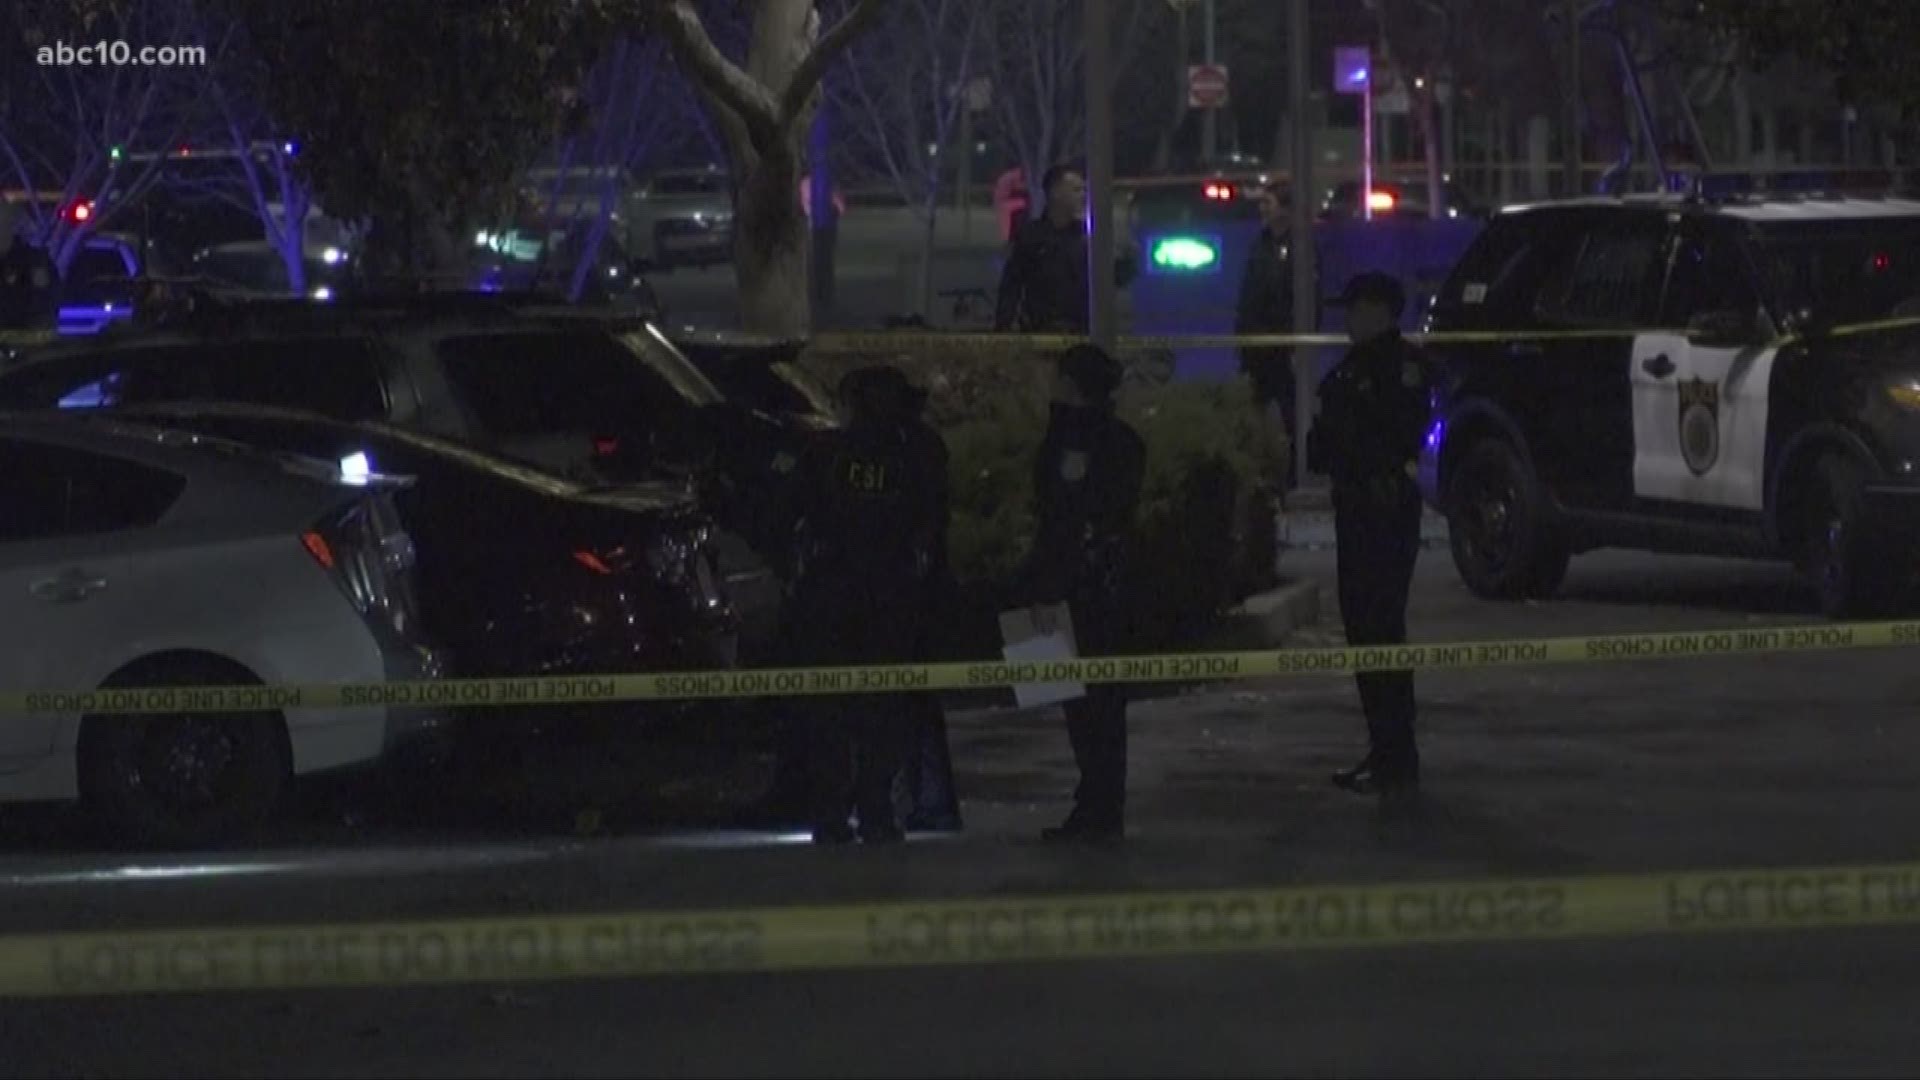 Sacramento Police are still searching for the suspect in a deadly shooting near Inderkum High School.